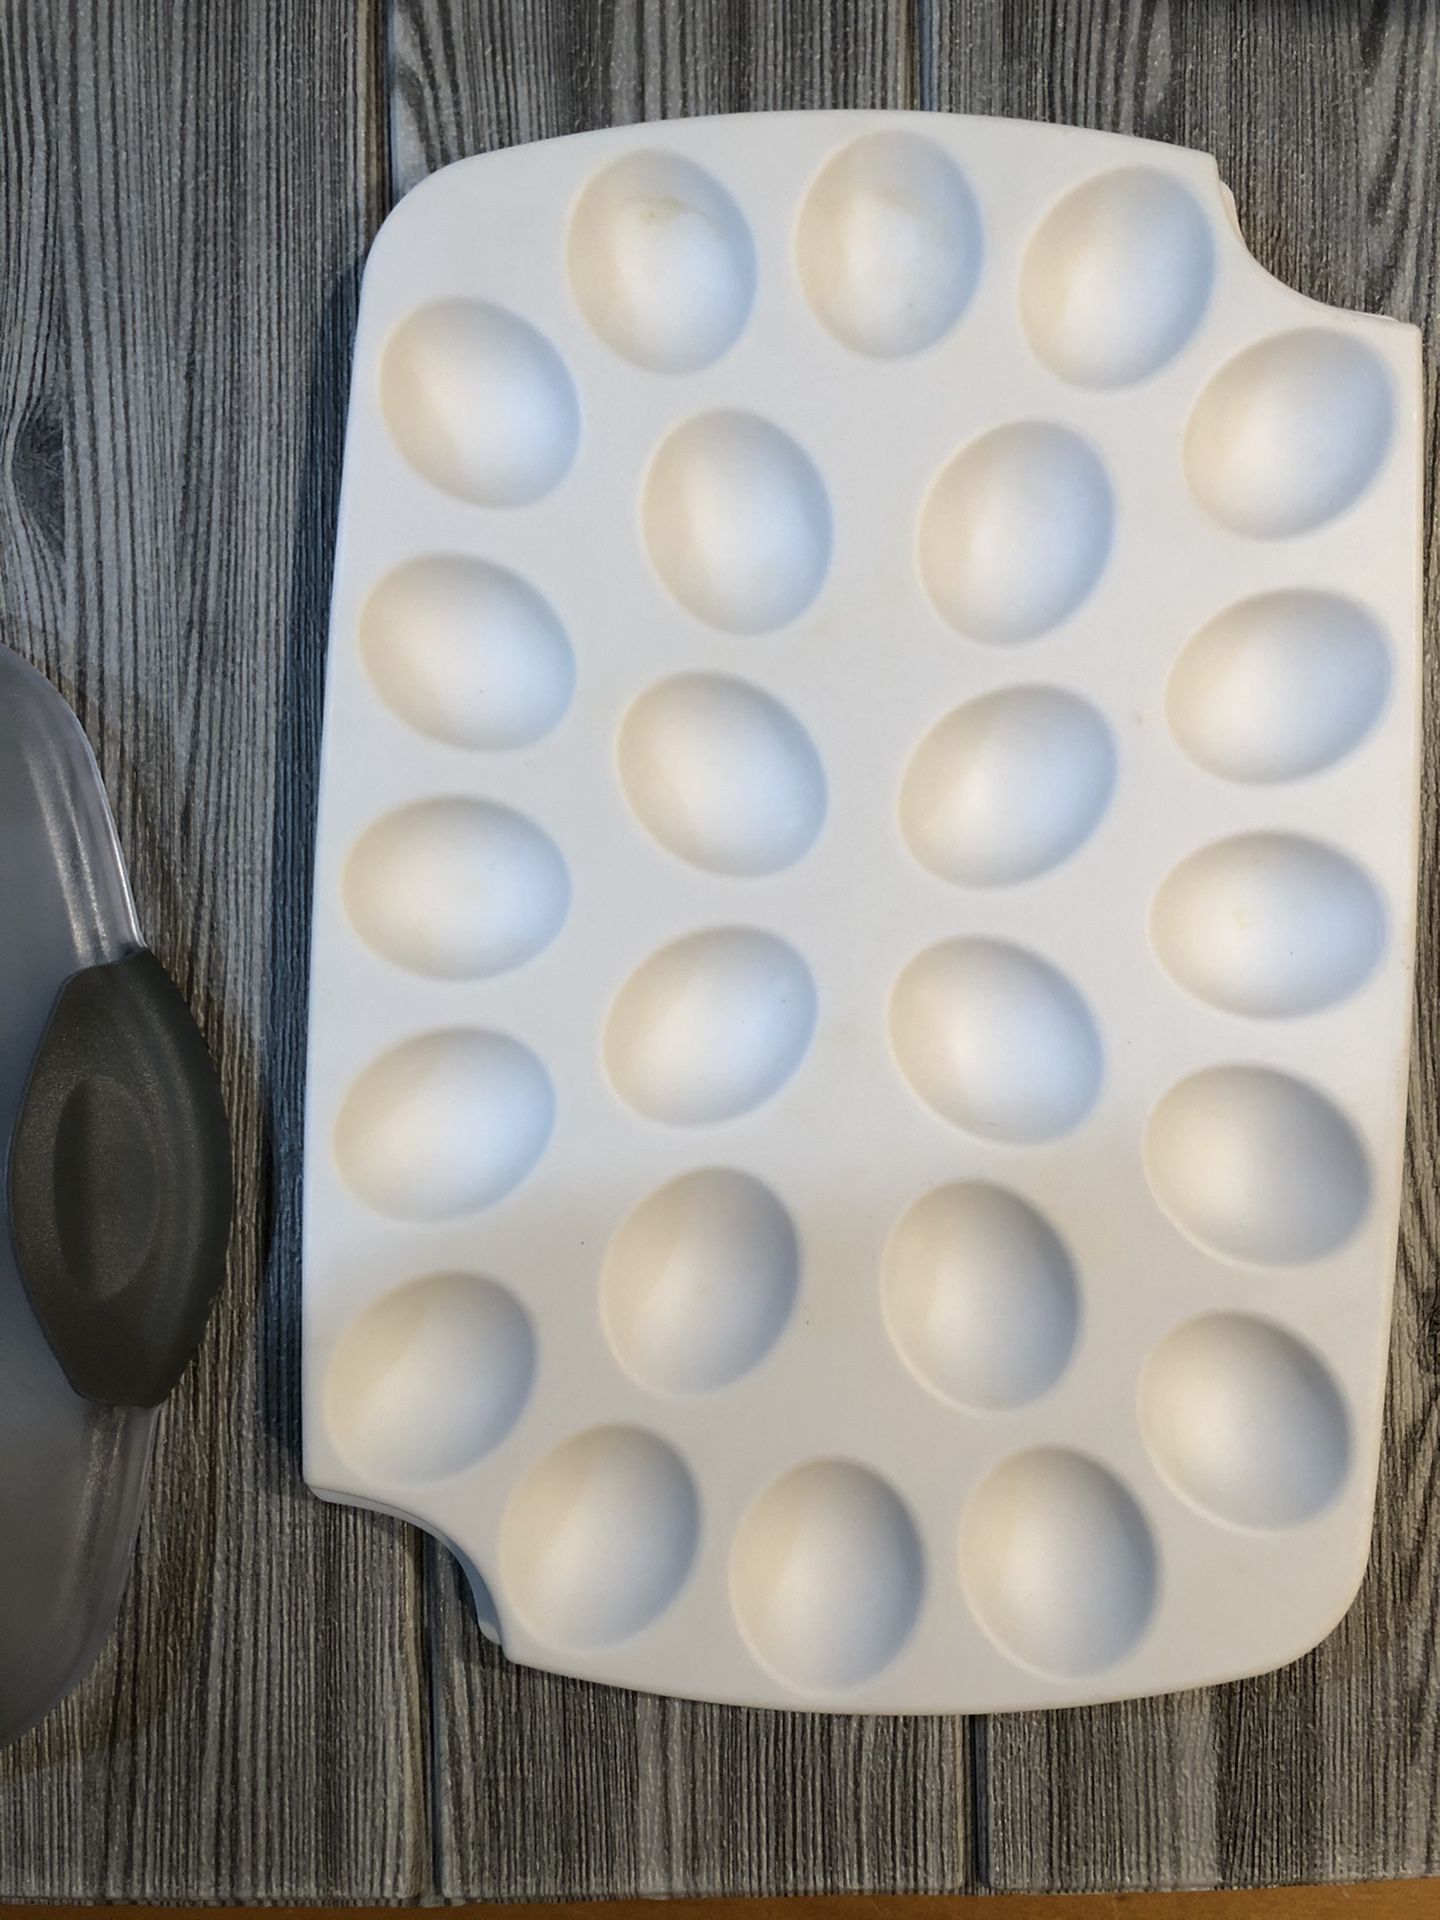 Pampered chef chill deviled egg veggie platter dish with ice pack and lid